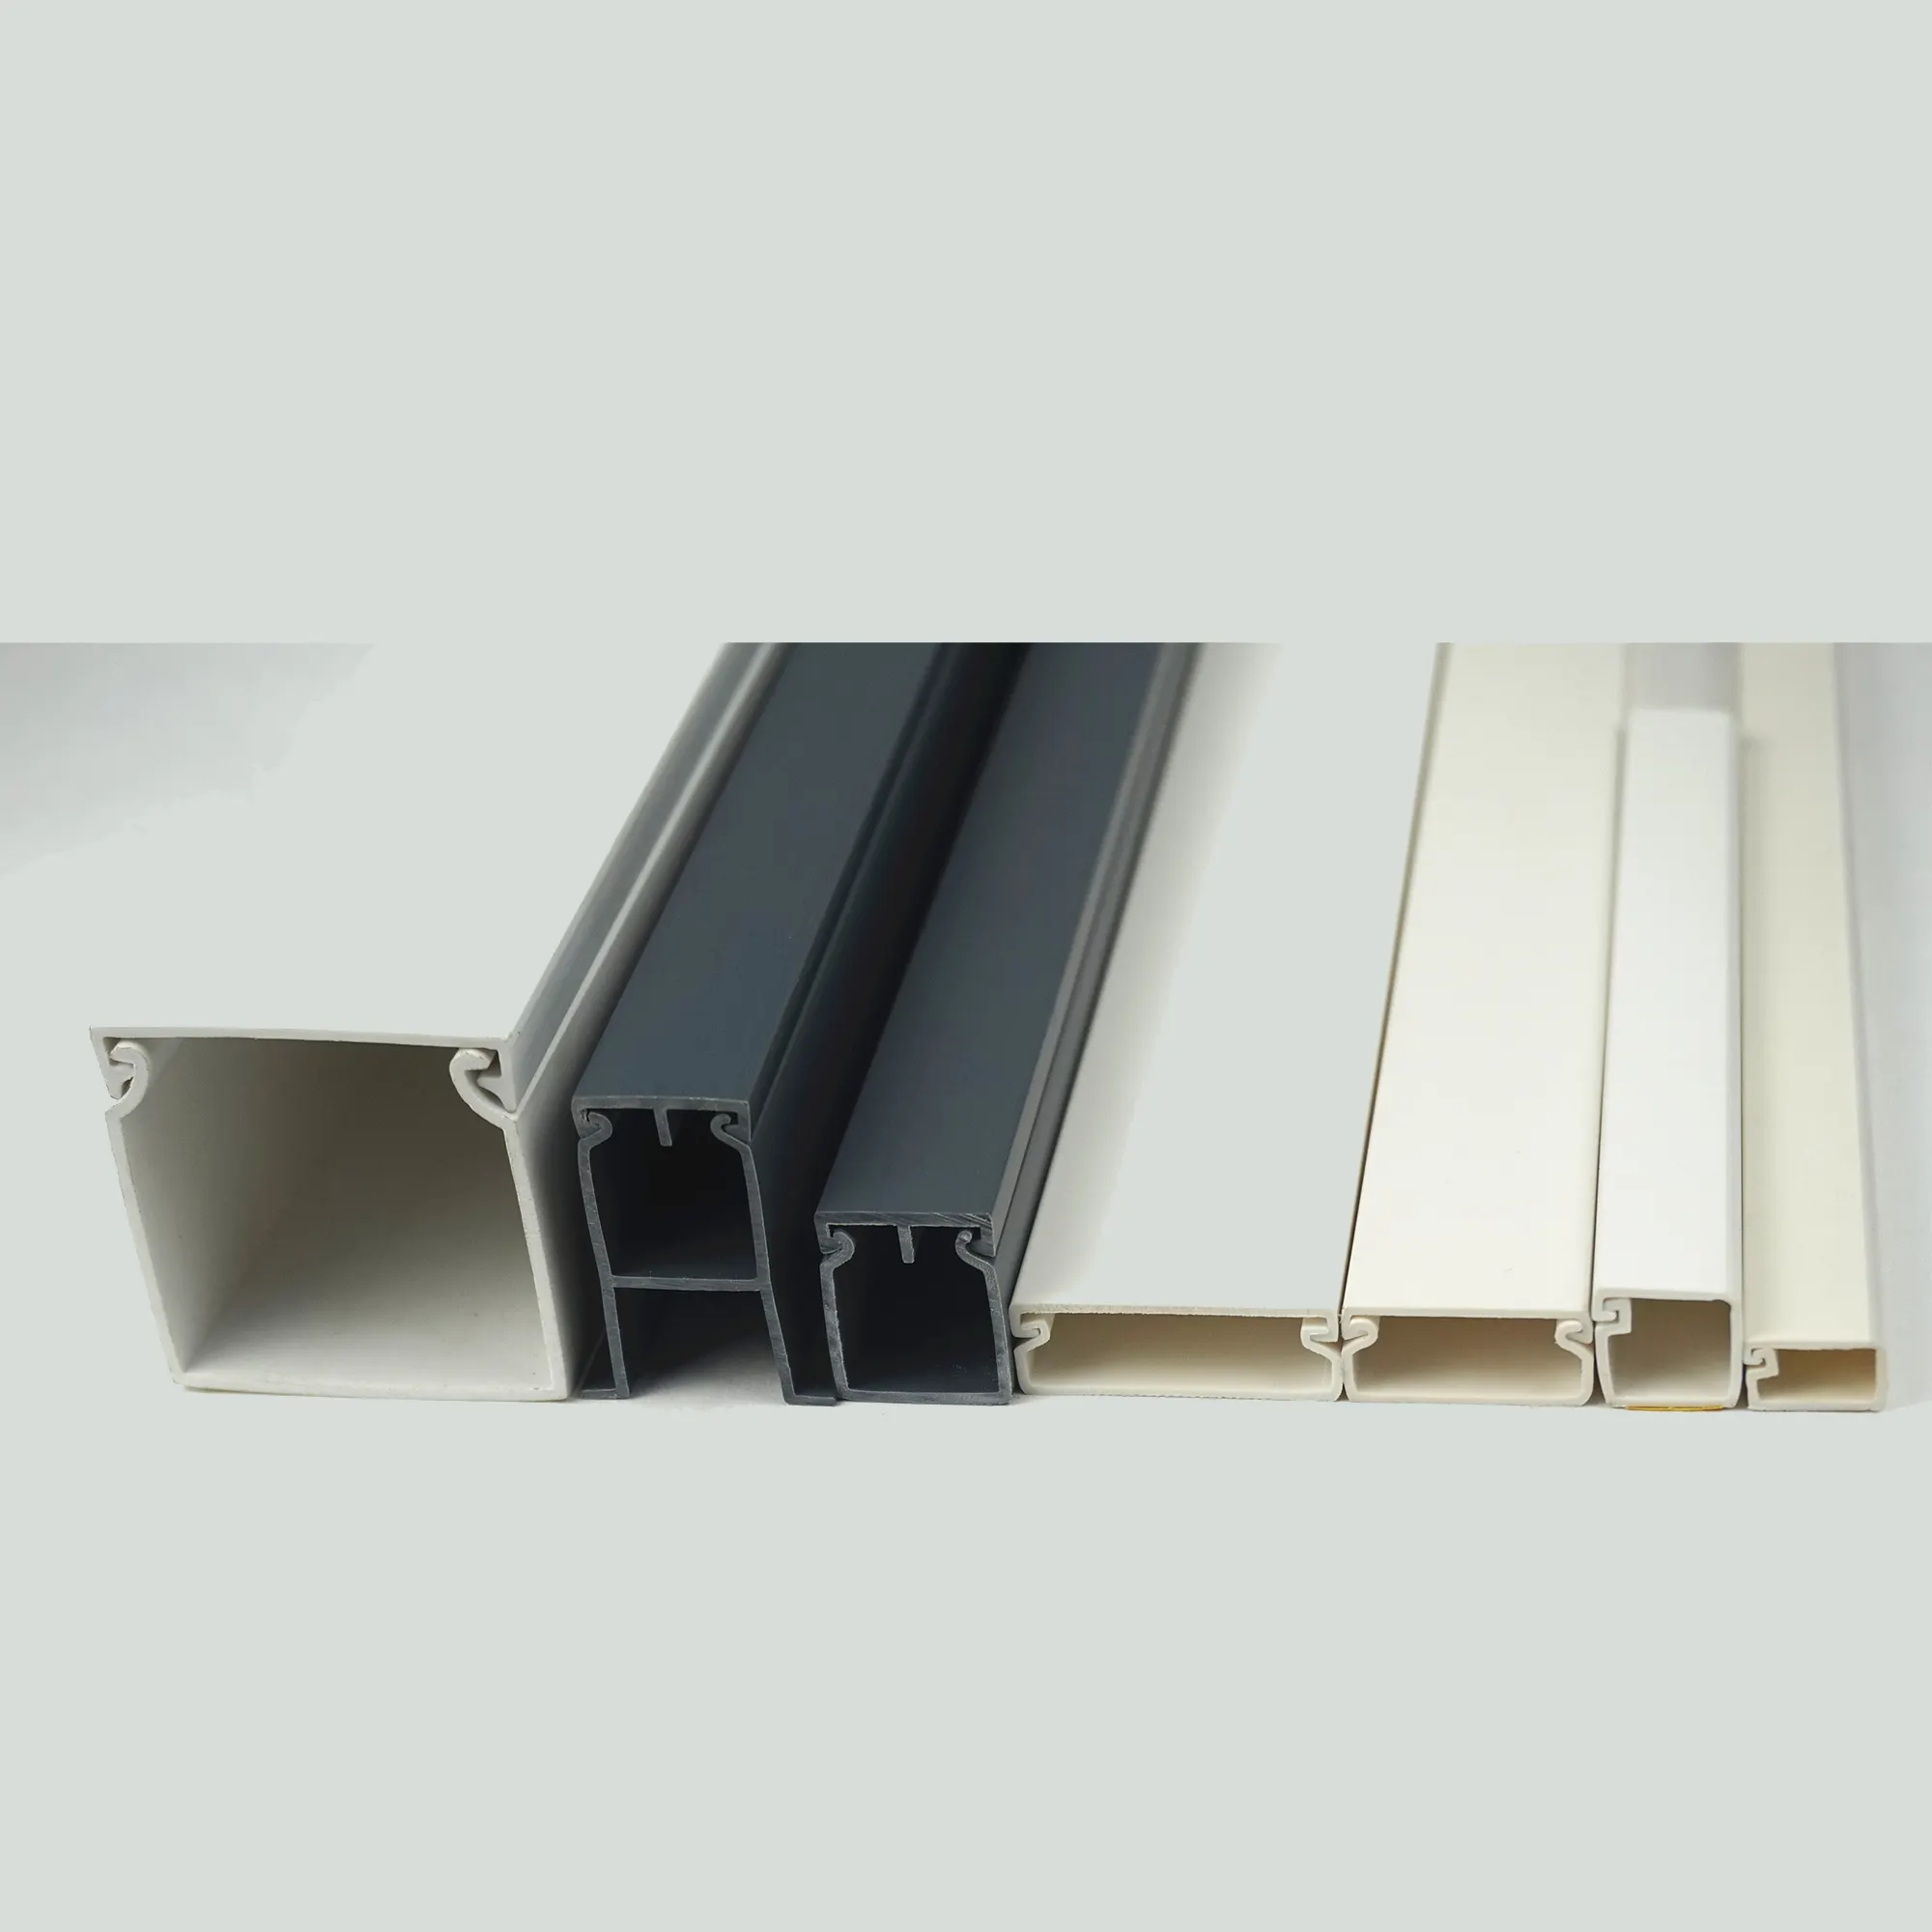 China black white network electrical cable tray pvc floor trunking size 200x100 100x100 100x50 50x100 50x50 40x40 16x25 20x20